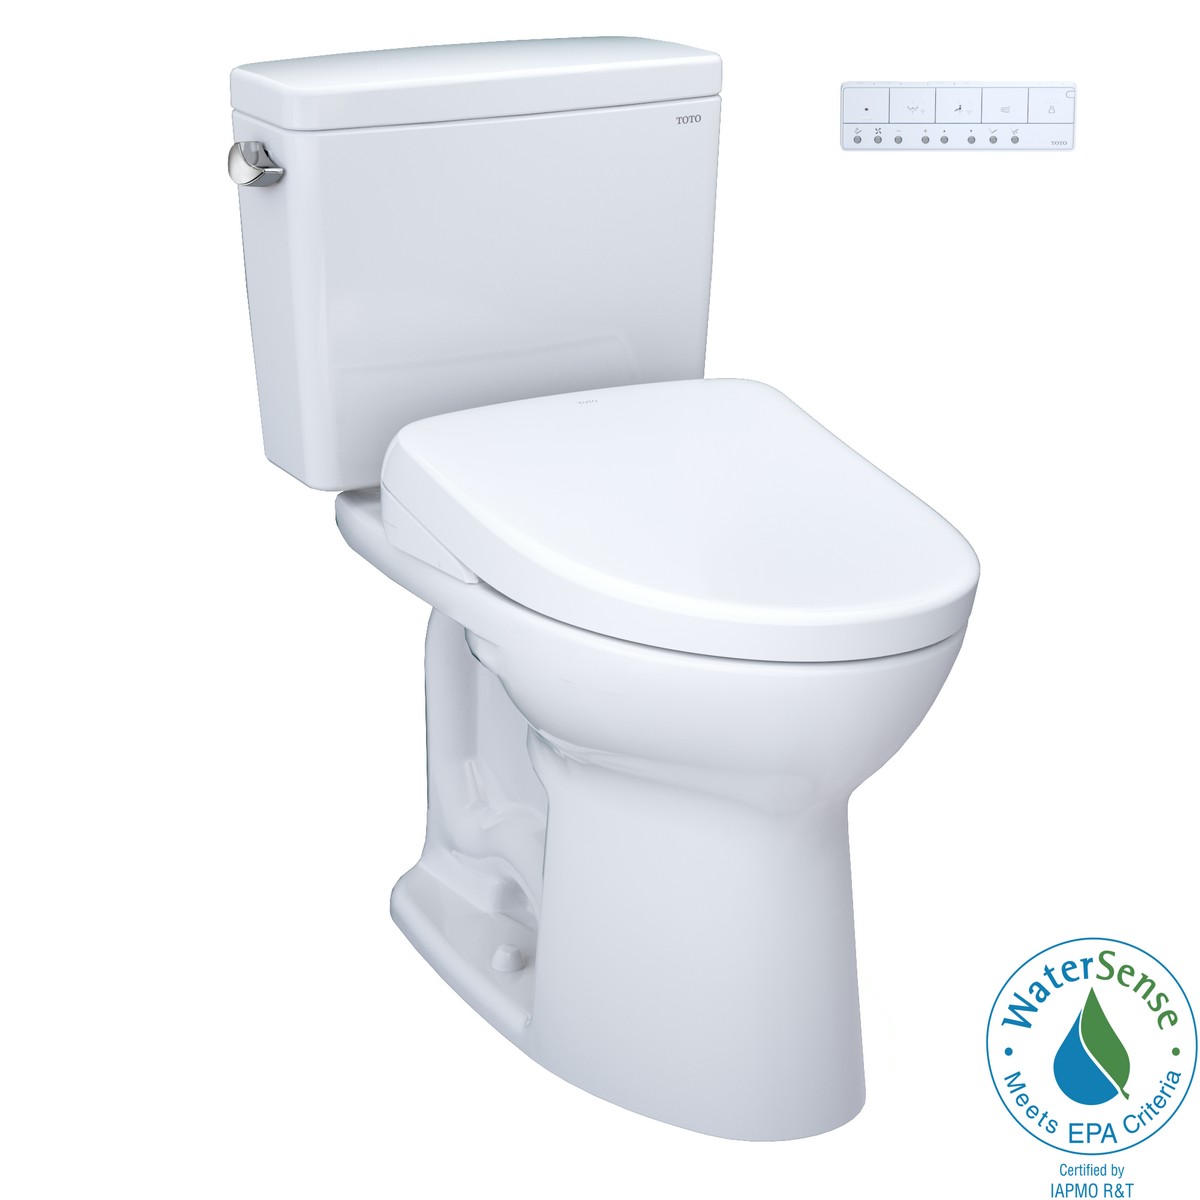 TOTO MW7764726CSF.10#01 DRAKE WASHLET+ 1.6 GPF TWO PIECE 10 INCH ROUGH-IN ELONGATED UNIVERSAL HEIGHT TORNADO FLUSH TOILET WITH WASHLET S7 BIDET SEAT IN COTTON WHITE